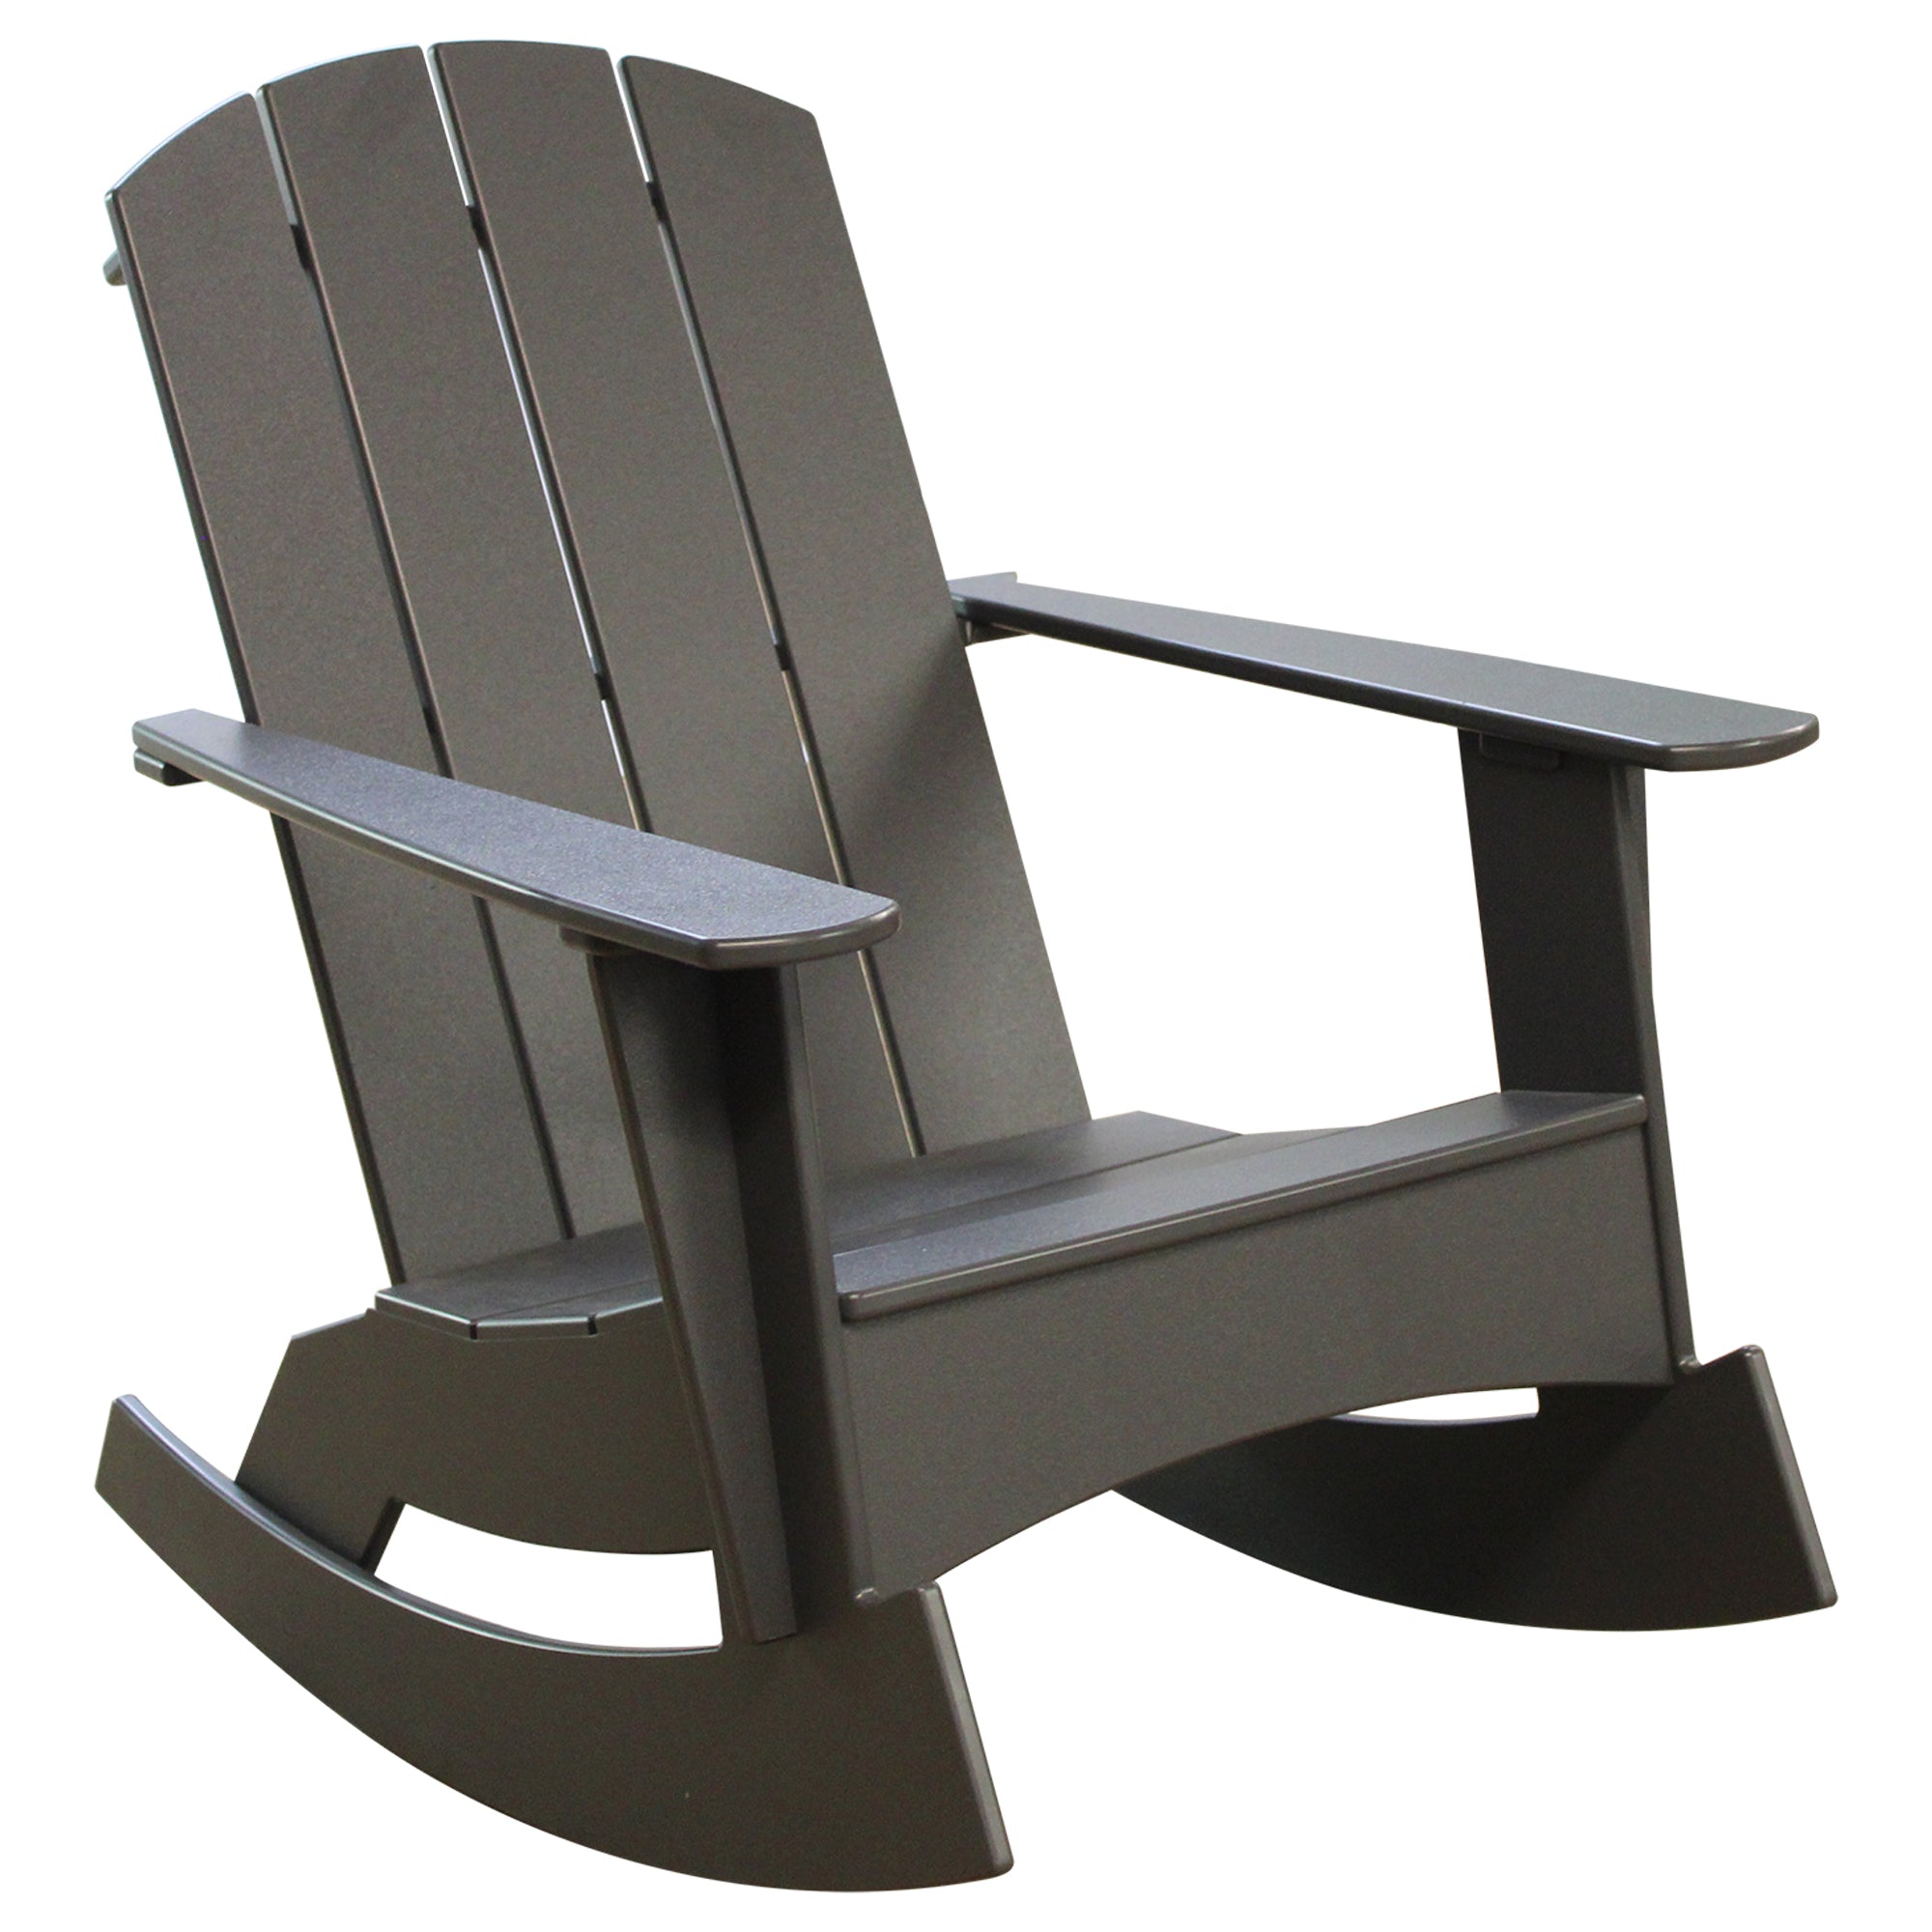 Adirondack Curved Rocking Chair - Preowned